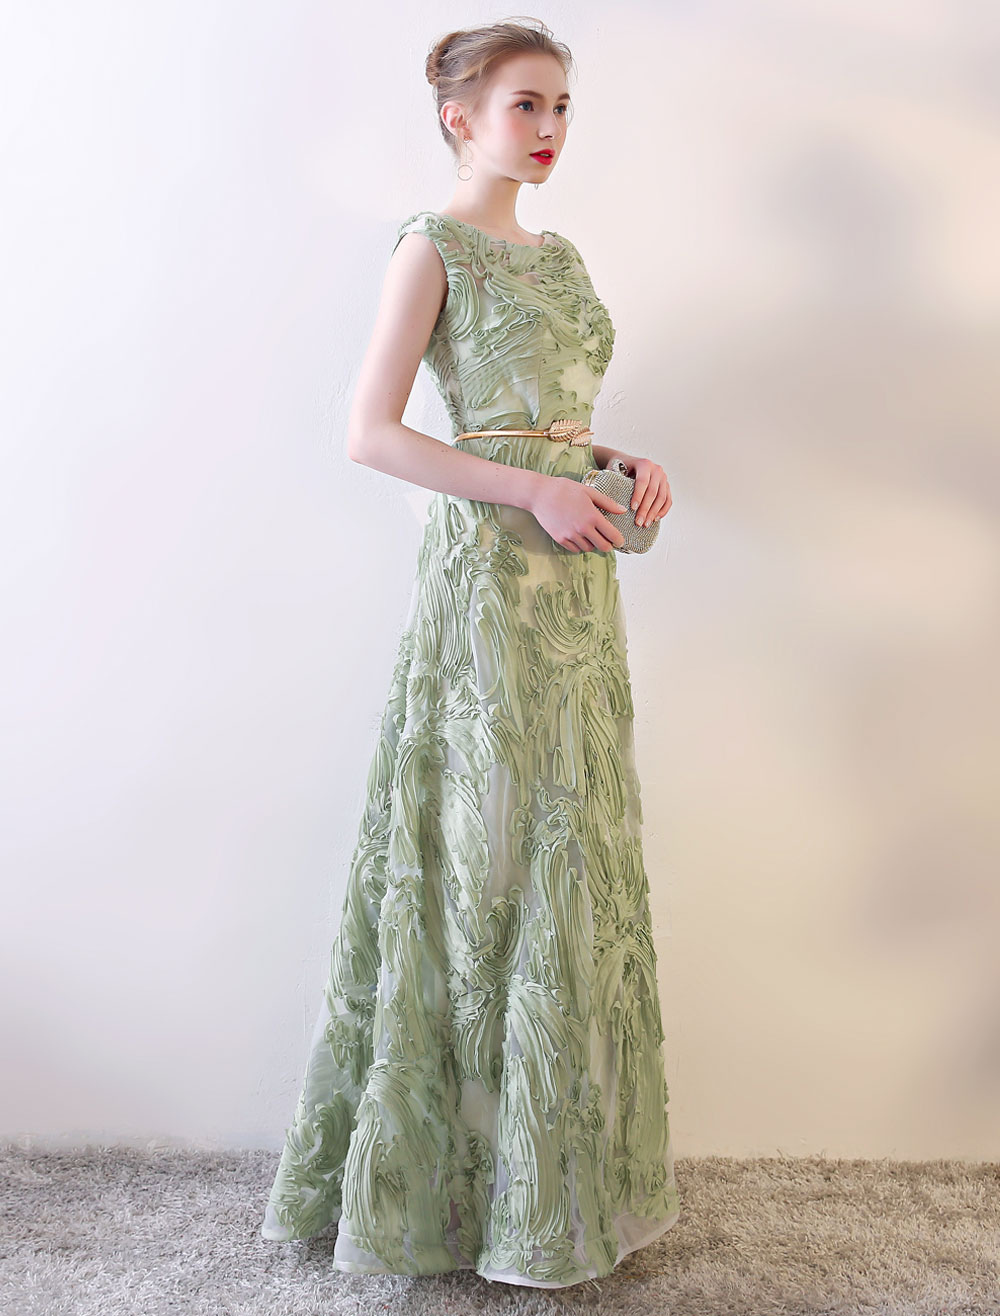 Prom Dresses Long Sage Green Sleeveless A Line Floor Length With Sash Wedding Guest Dress 9533